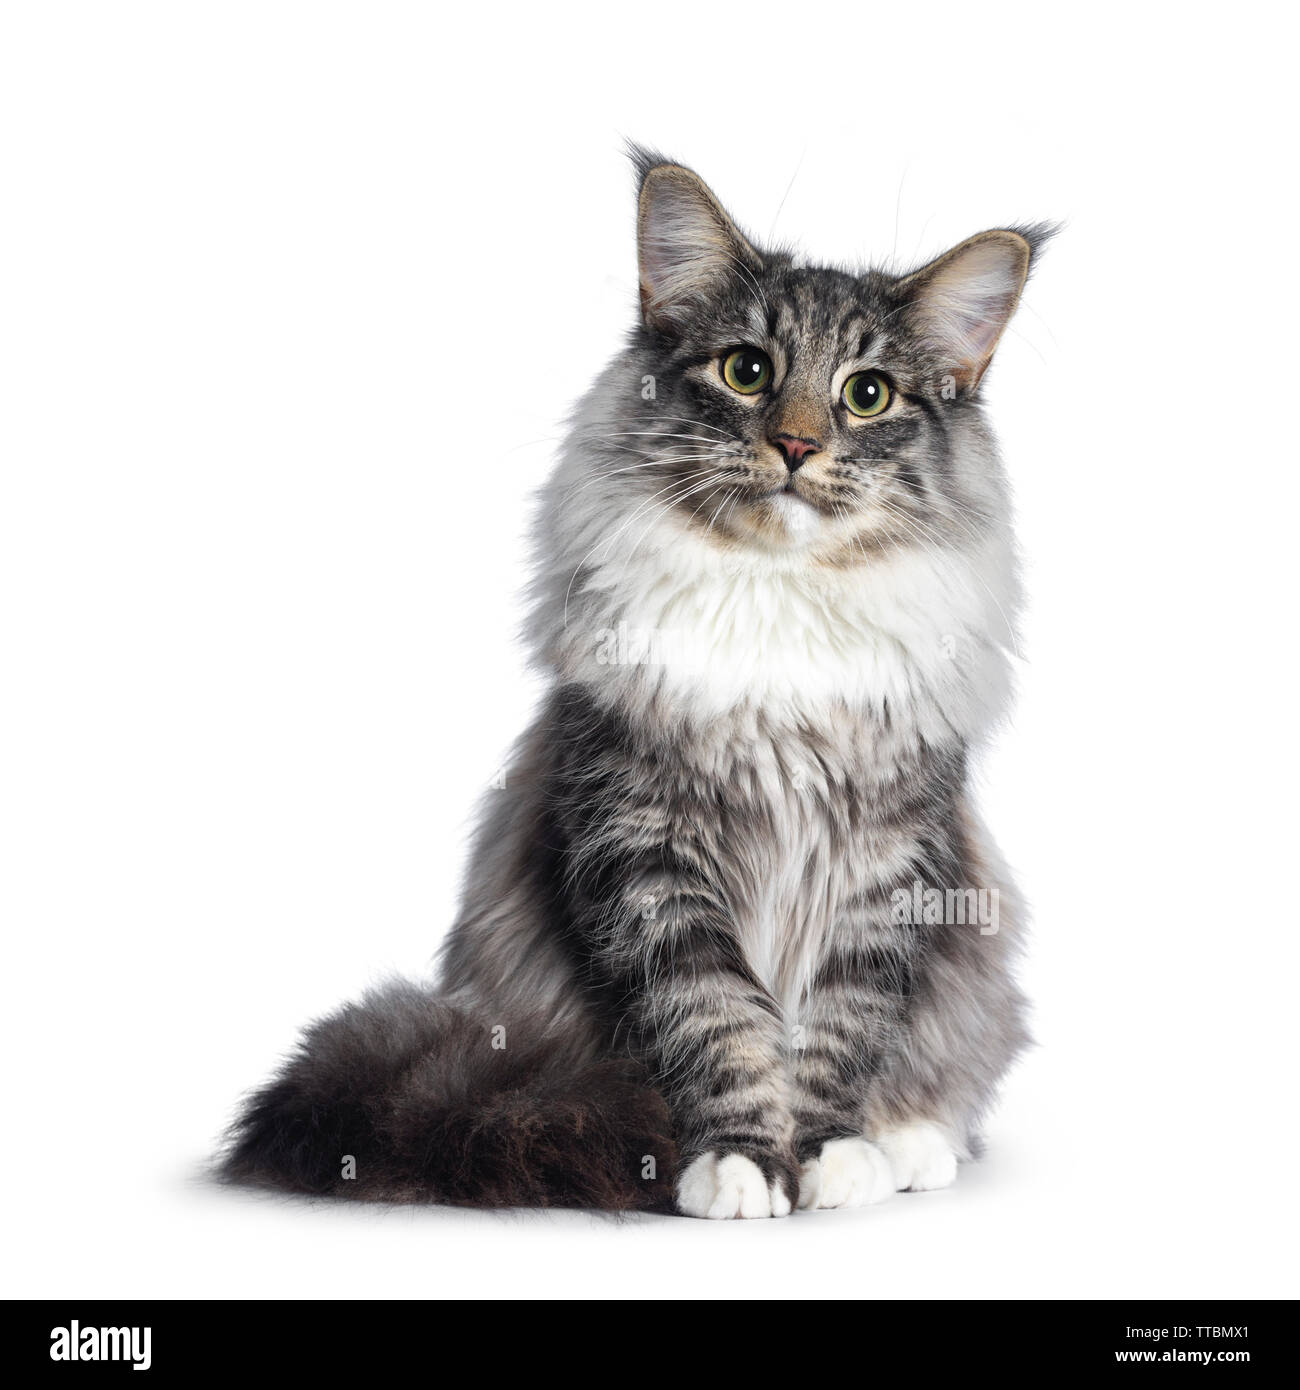 Adorable young Norwegian Forestcat, sitting facing front. Looking curious at lens. Isolated on white background. Stock Photo